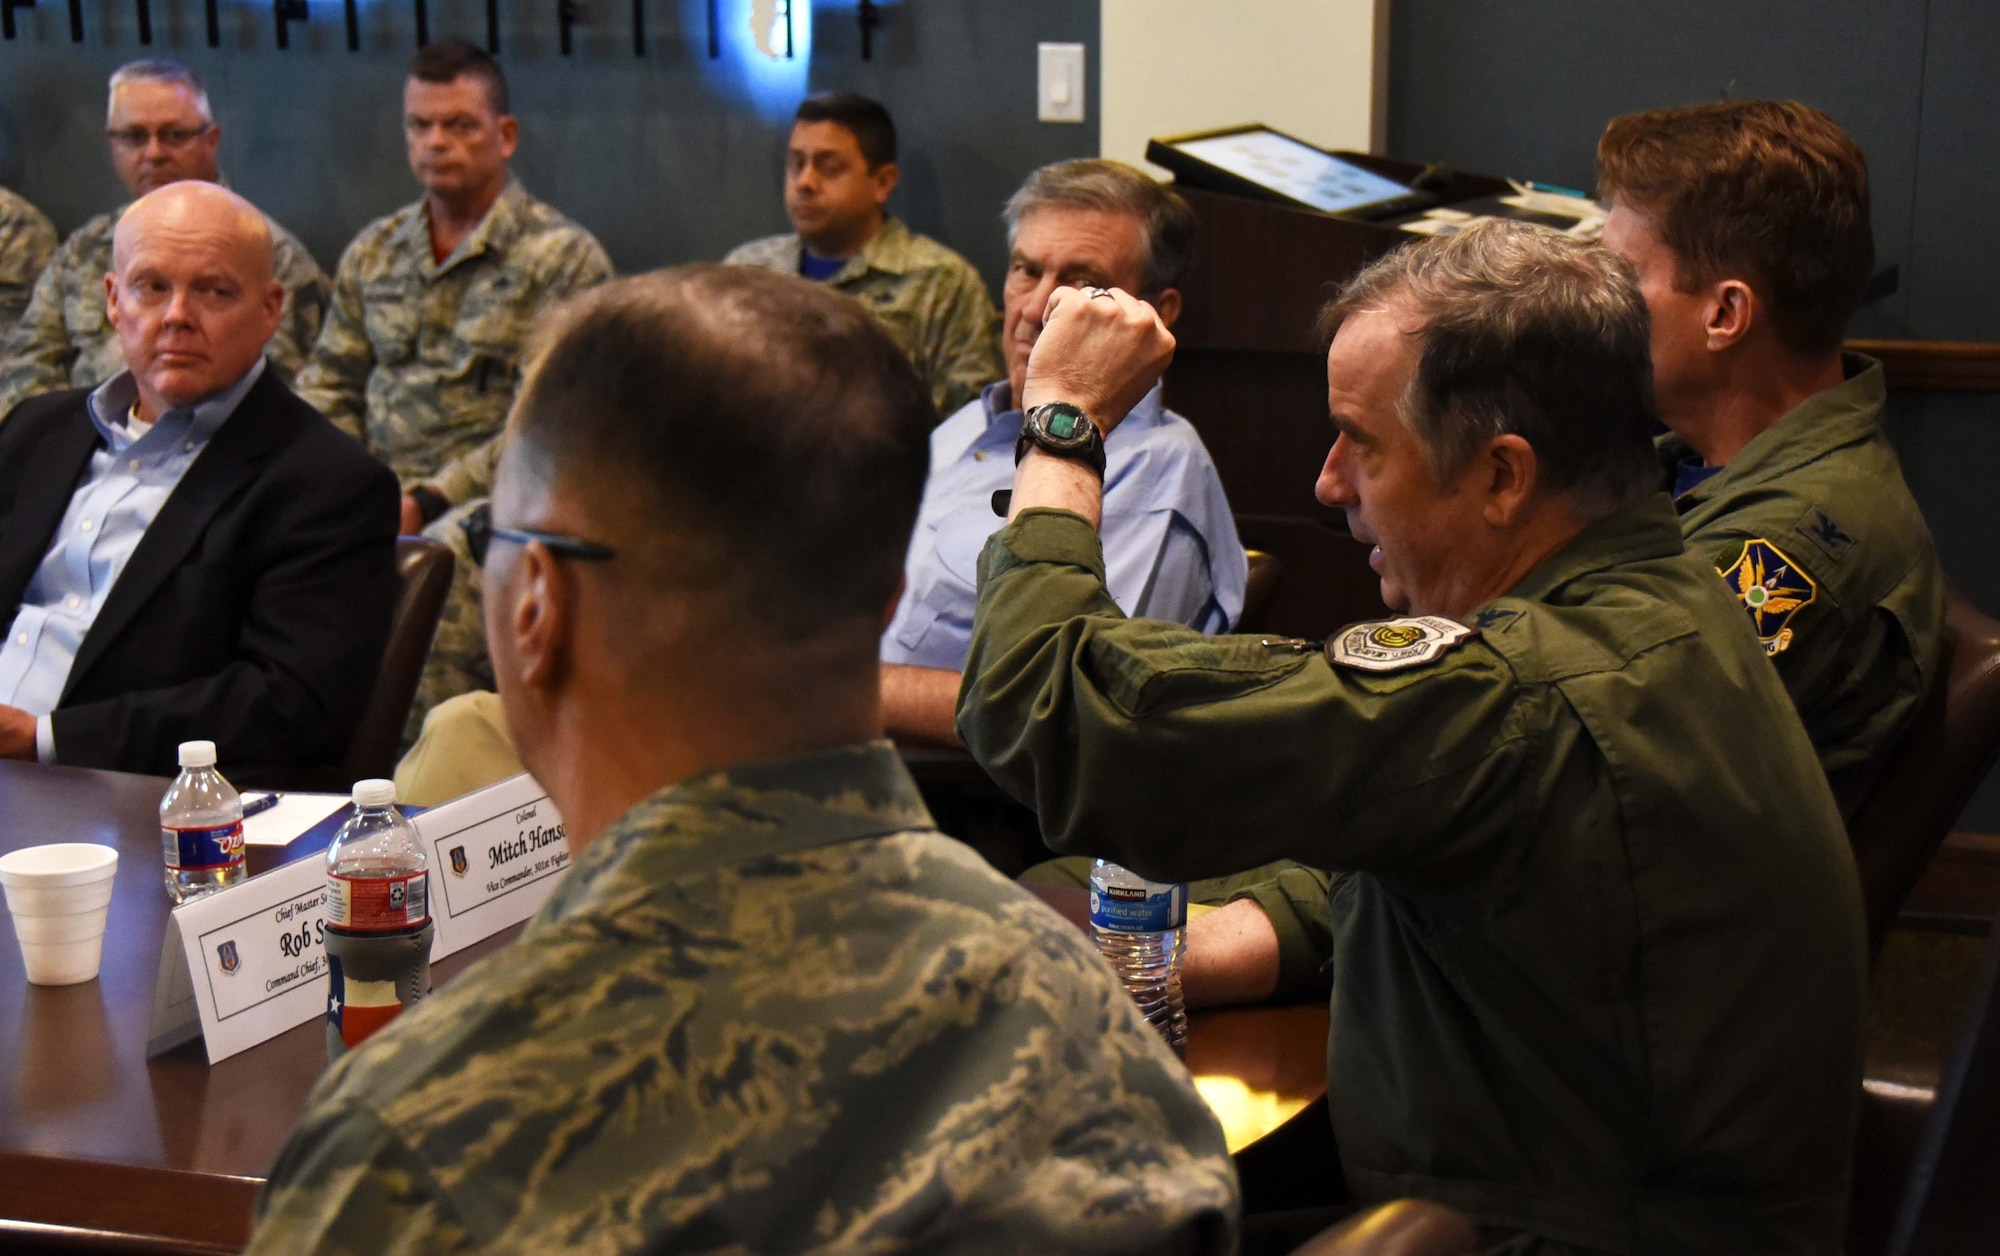 Col. Gregory C. Jones, 301st Fighter Wing commander, gives a briefing to 12 honorary commanders during a wing overview event, May 18, 2018, at Naval Air Station Fort Worth Joint Reserve Base, Texas. The event's goal was to enhance the understanding of the wing's mission and capabilities for those recently inducted into the Honorary Commanders' Program. (U.S. Air Force photo by Tech. Sgt. Charles Taylor)